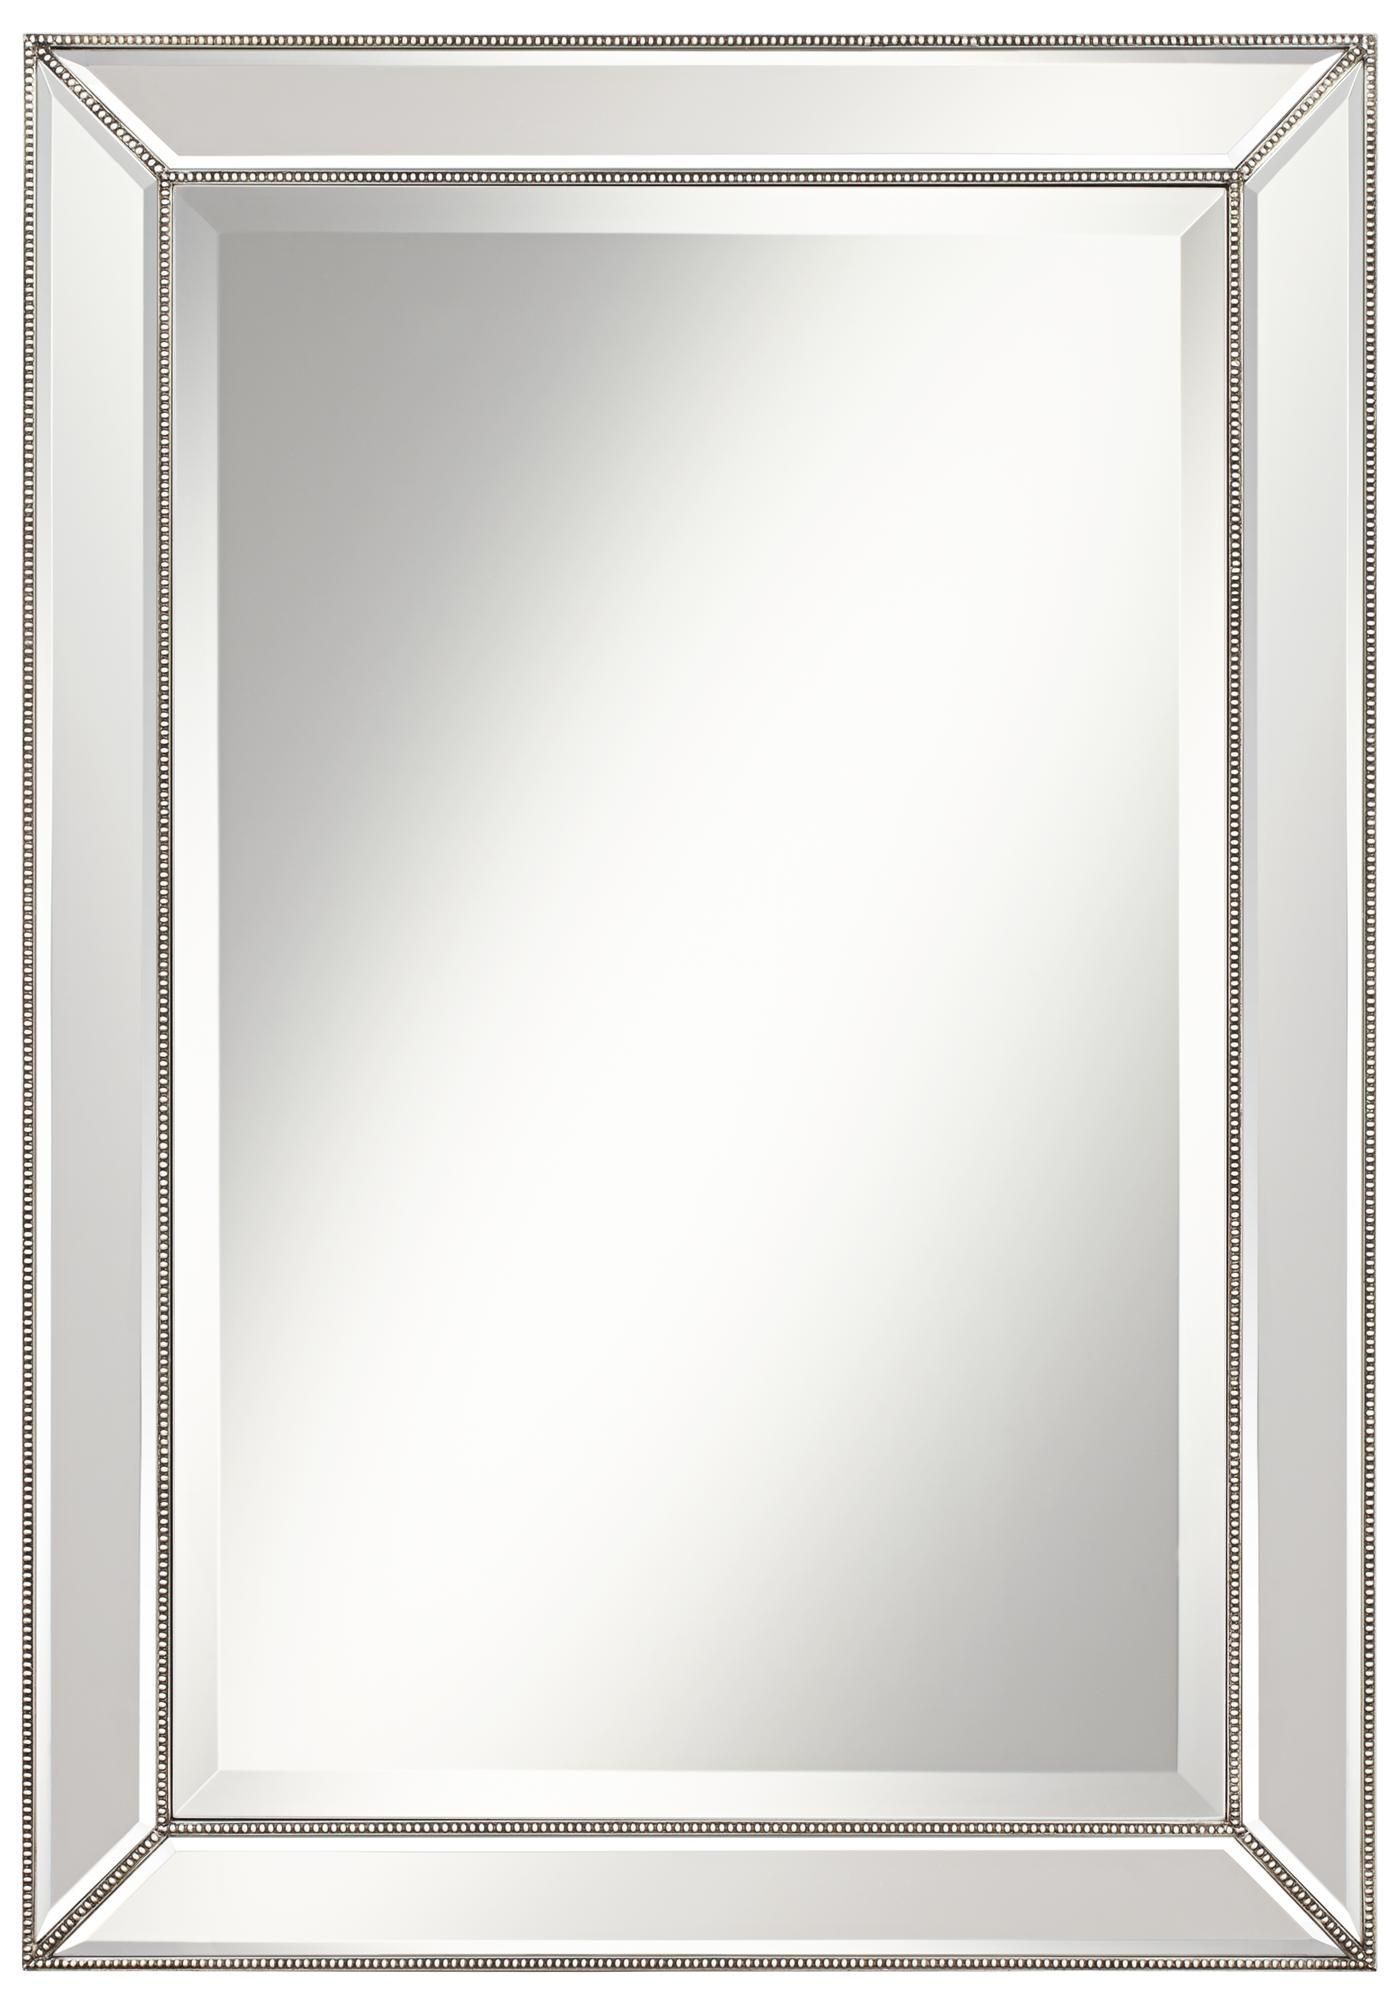 Roseau Silver Pewter 24" X 34" Beaded Wall Mirror – #1W988 | Lamps Plus Pertaining To Silver Beaded Square Wall Mirrors (View 10 of 15)